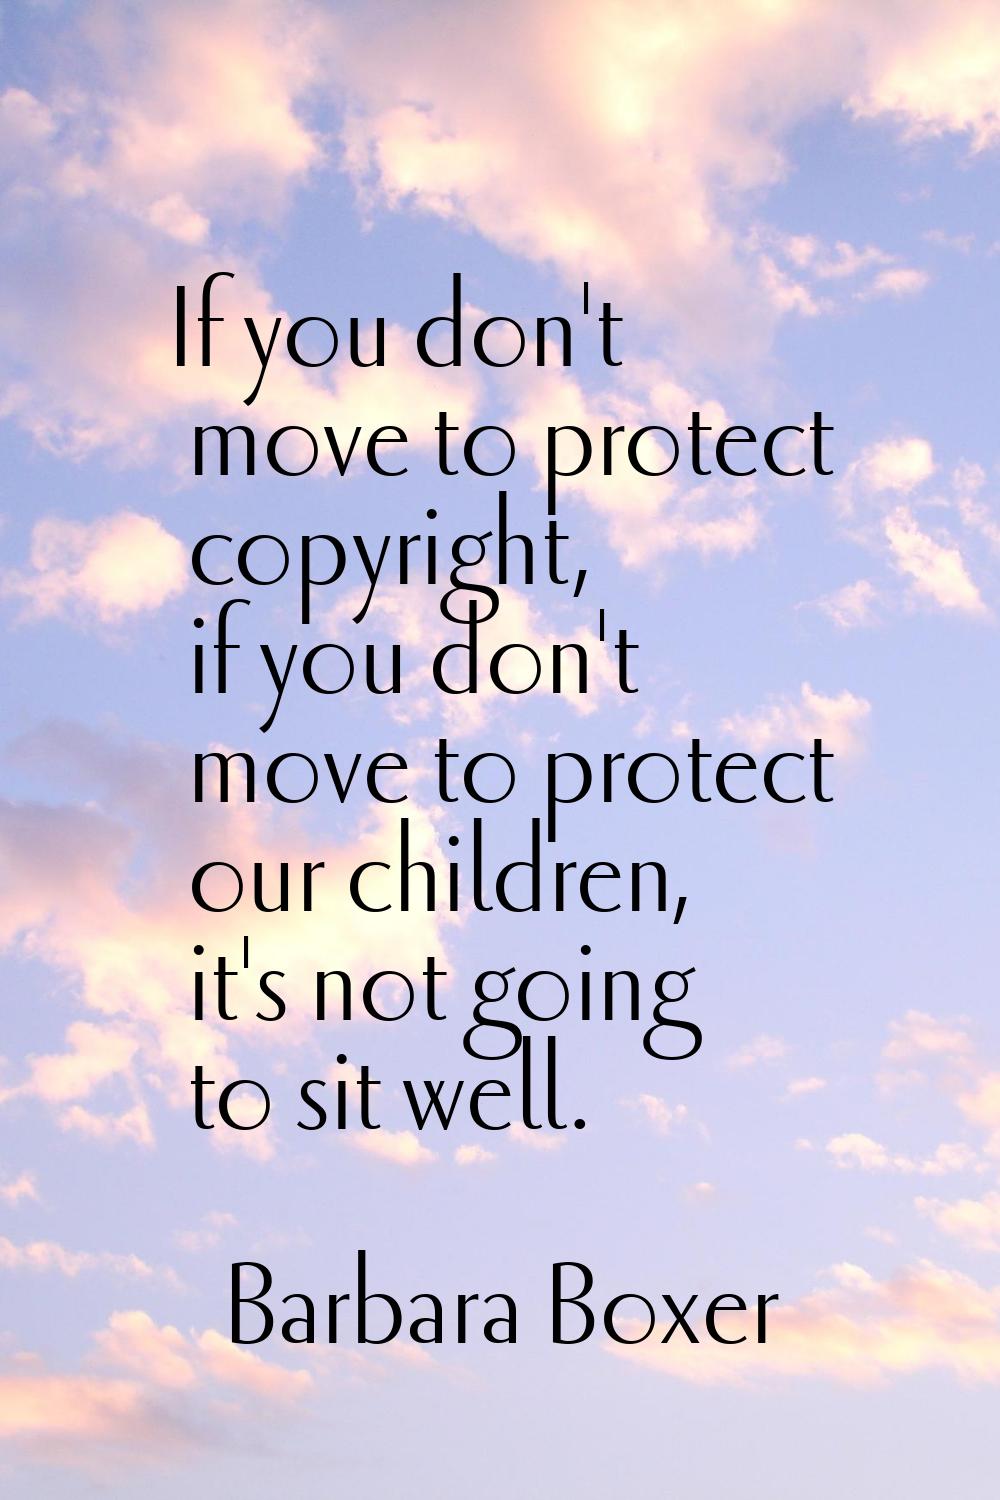 If you don't move to protect copyright, if you don't move to protect our children, it's not going t